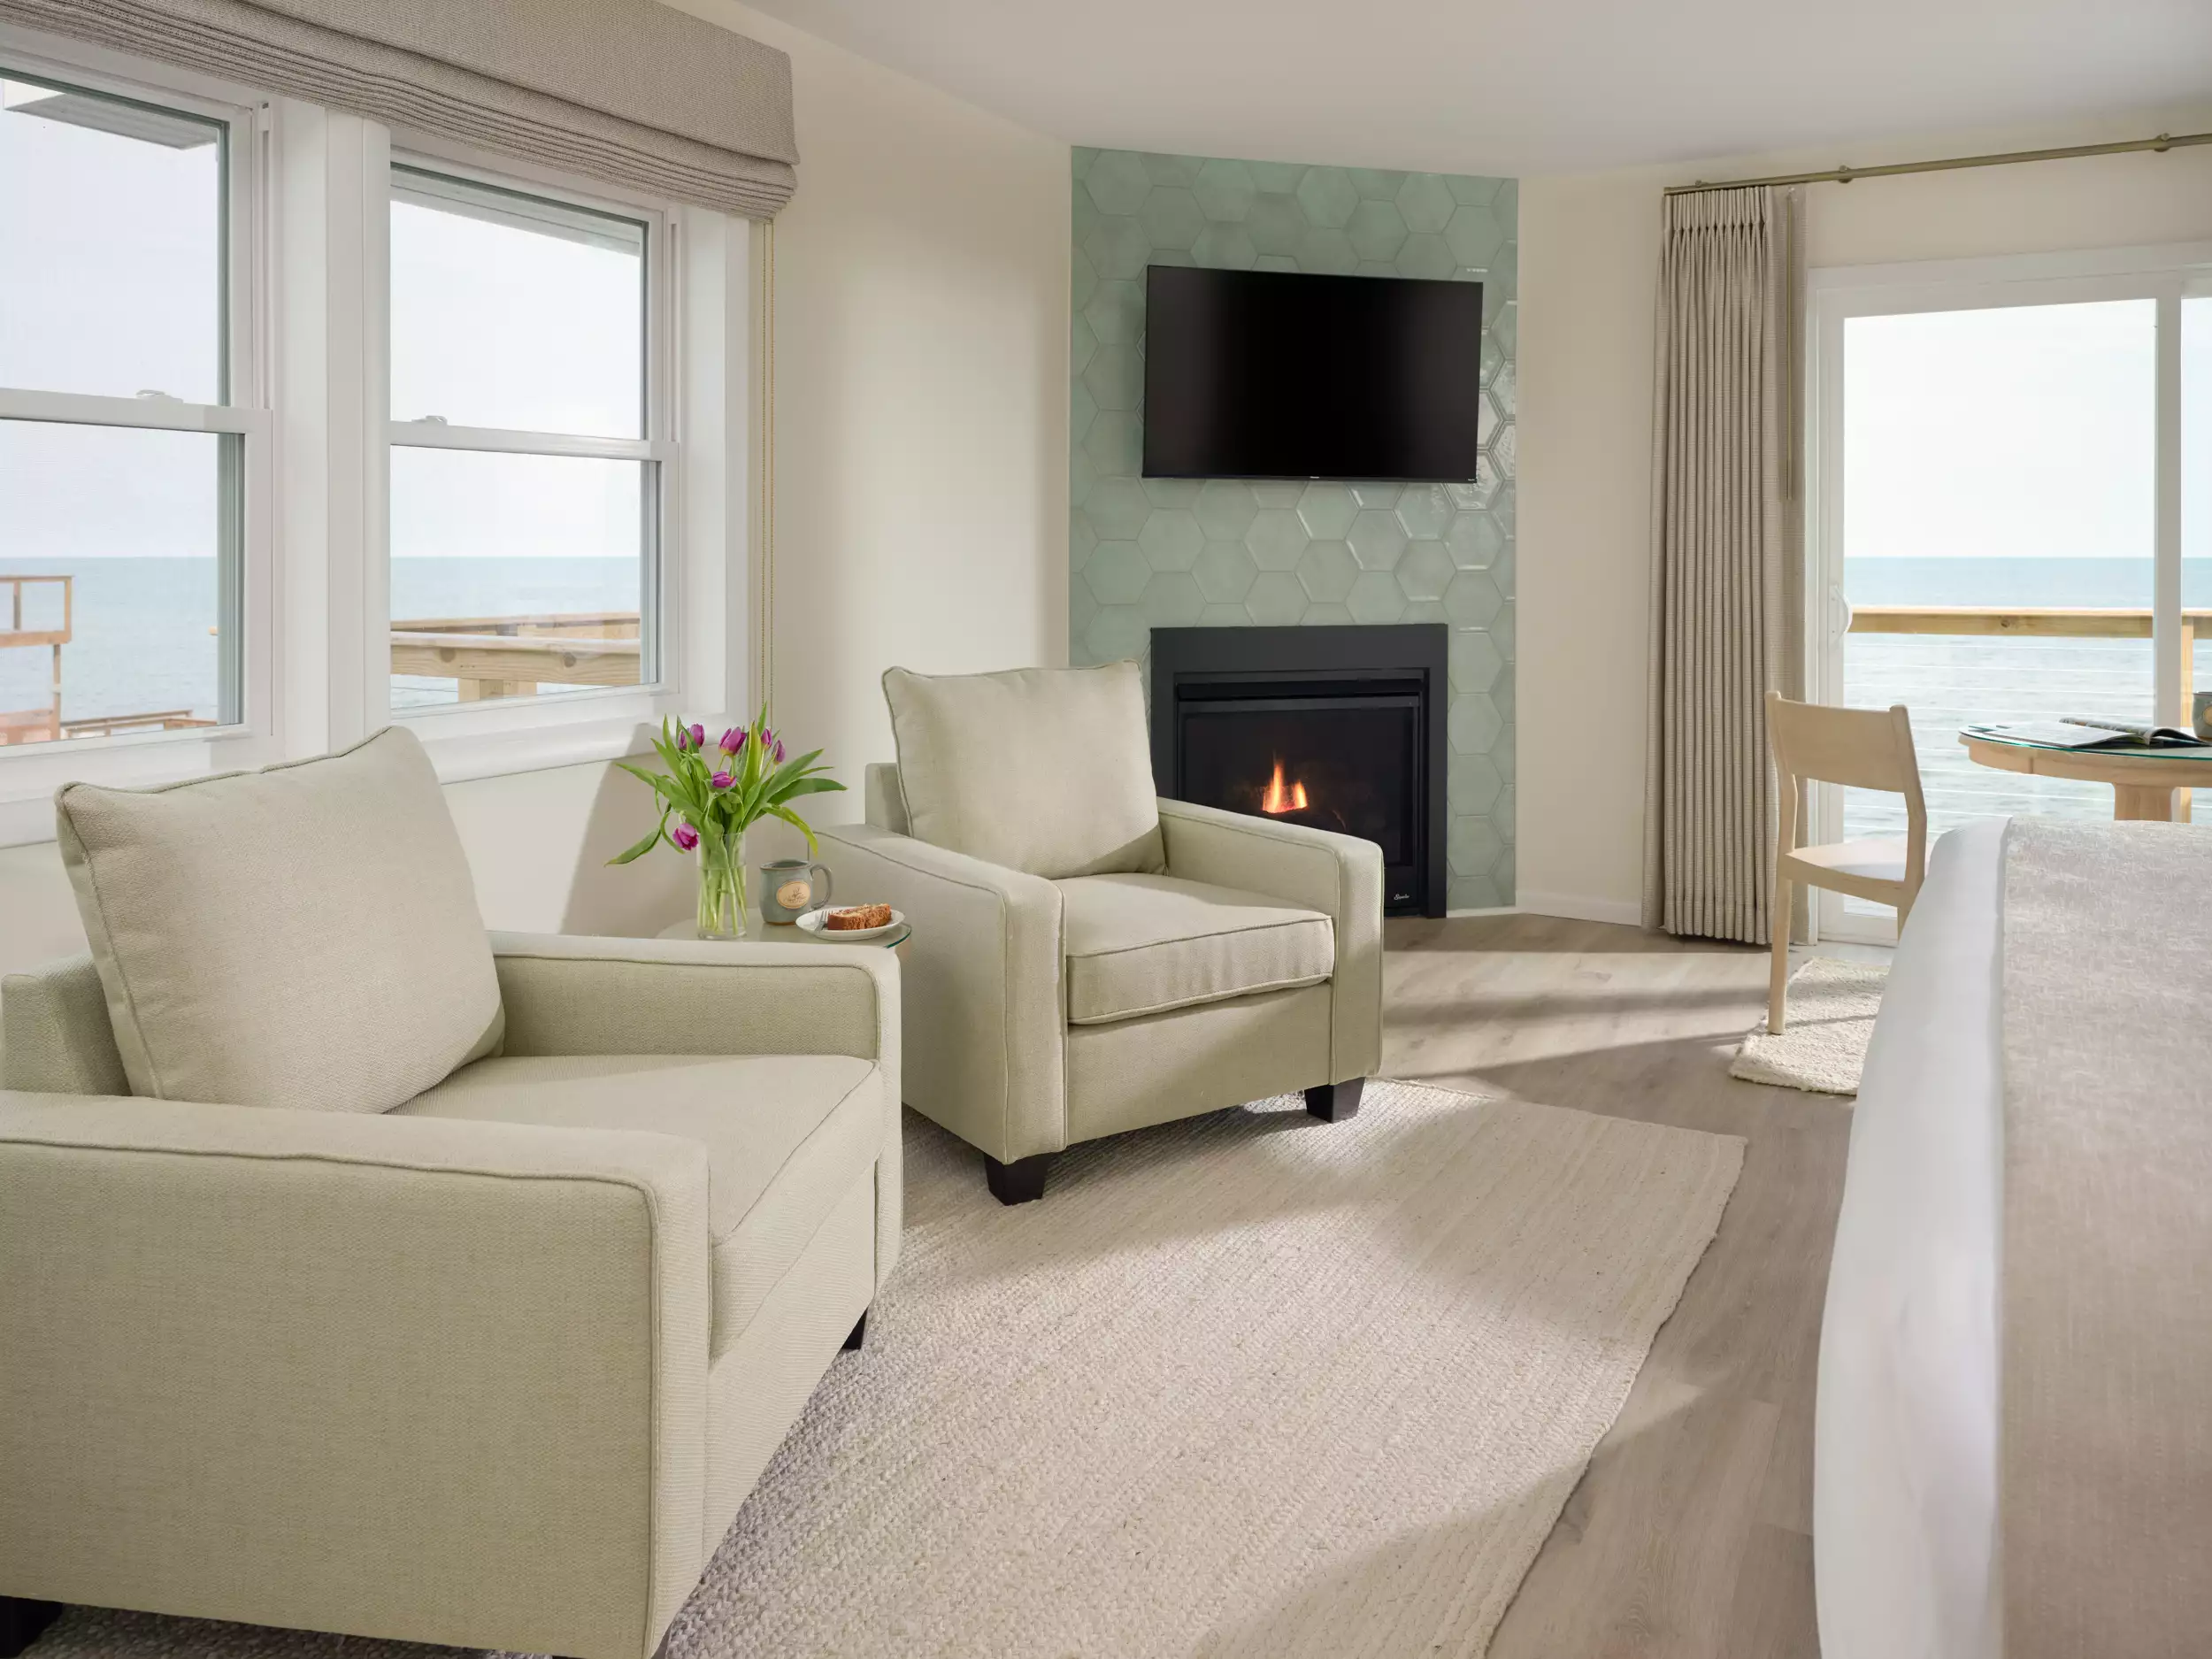 Plush chairs next to a gas fireplace with Lake Huron views